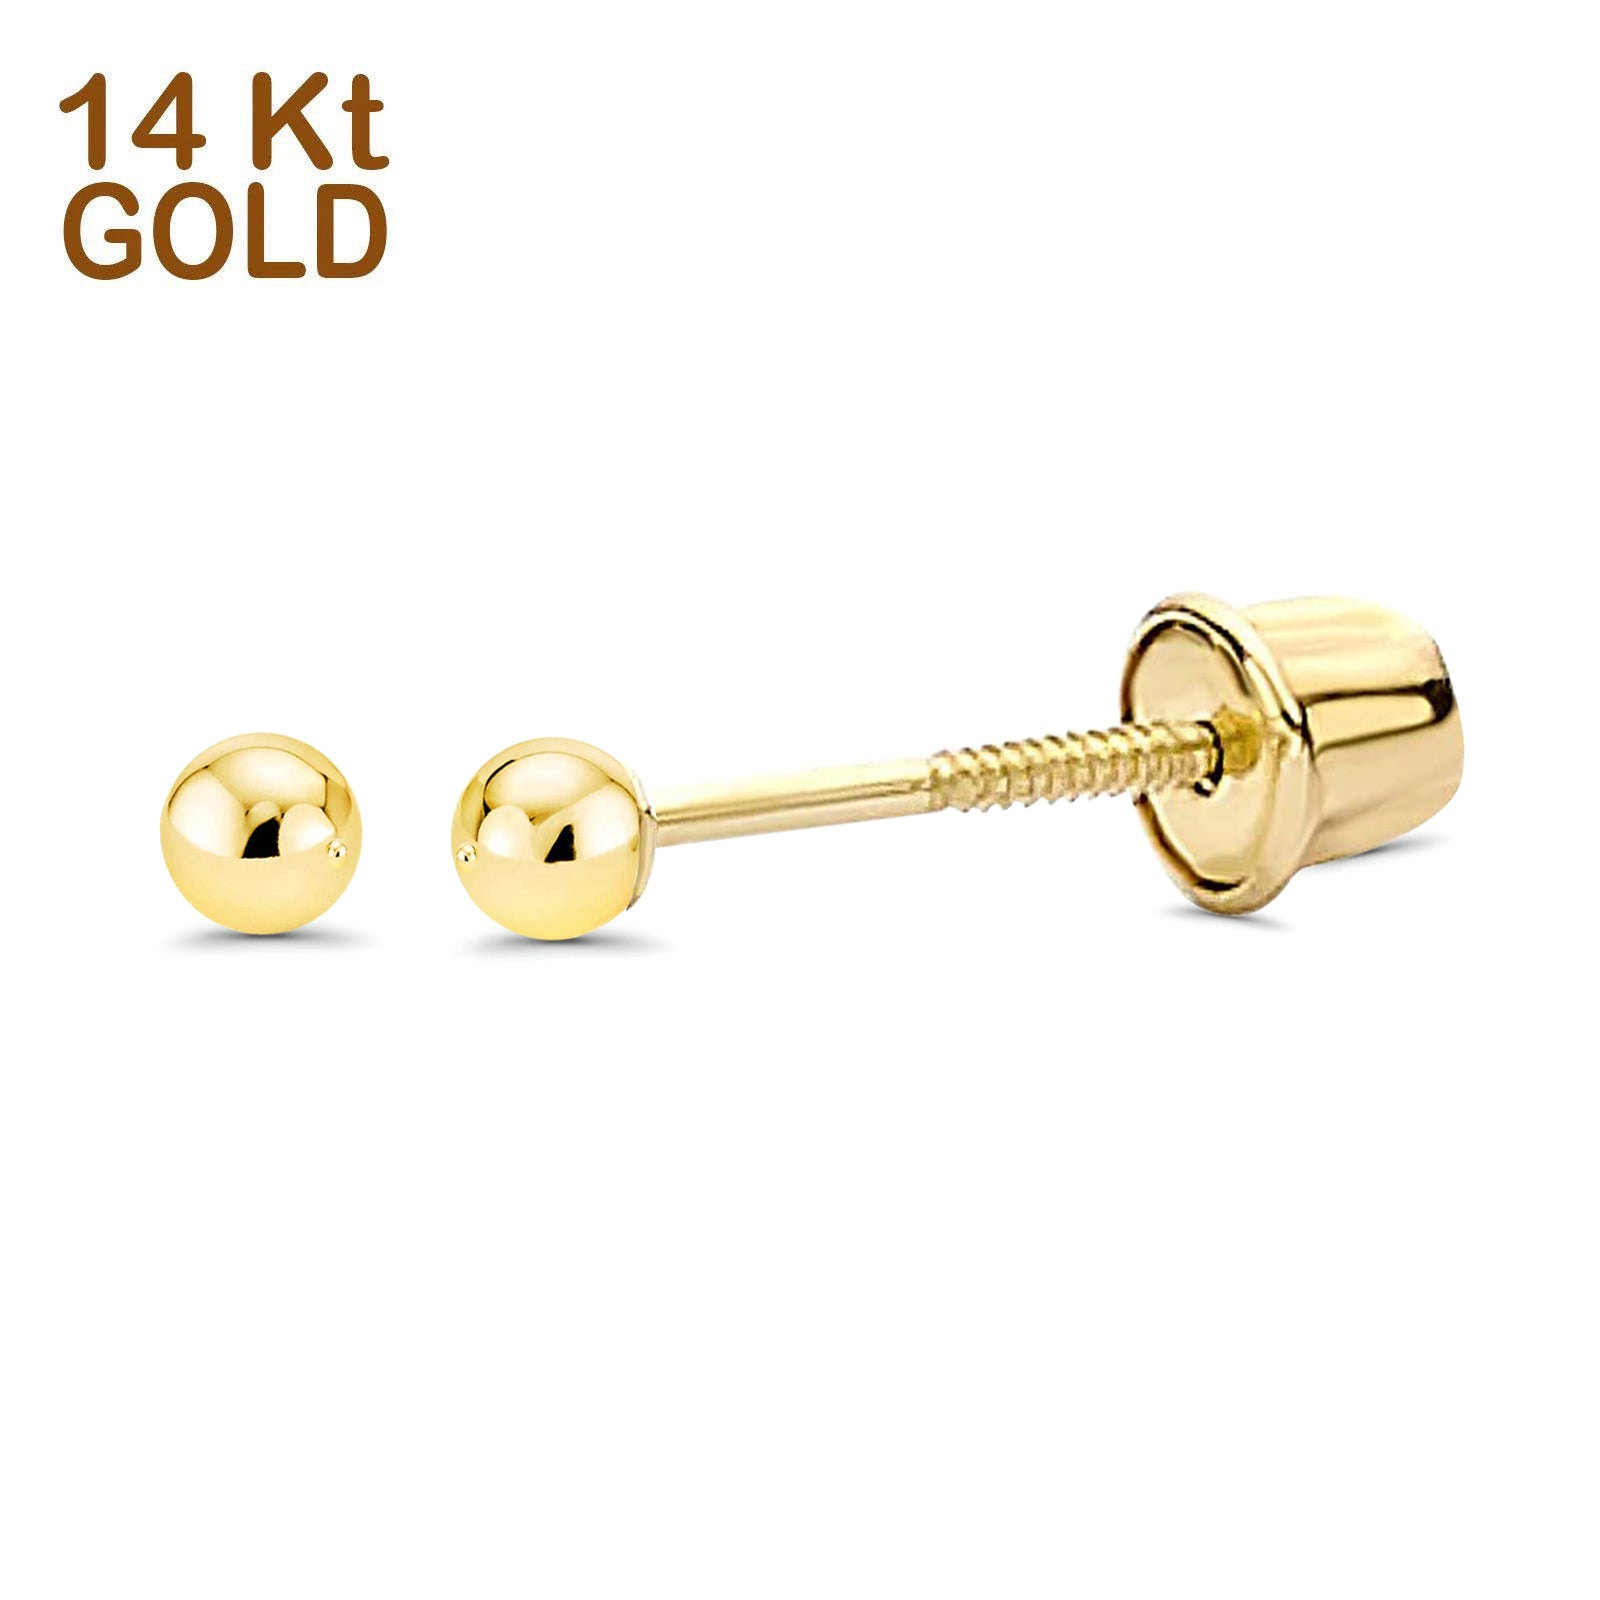 Solid 14K Gold Ball Studs - Assorted Sizes